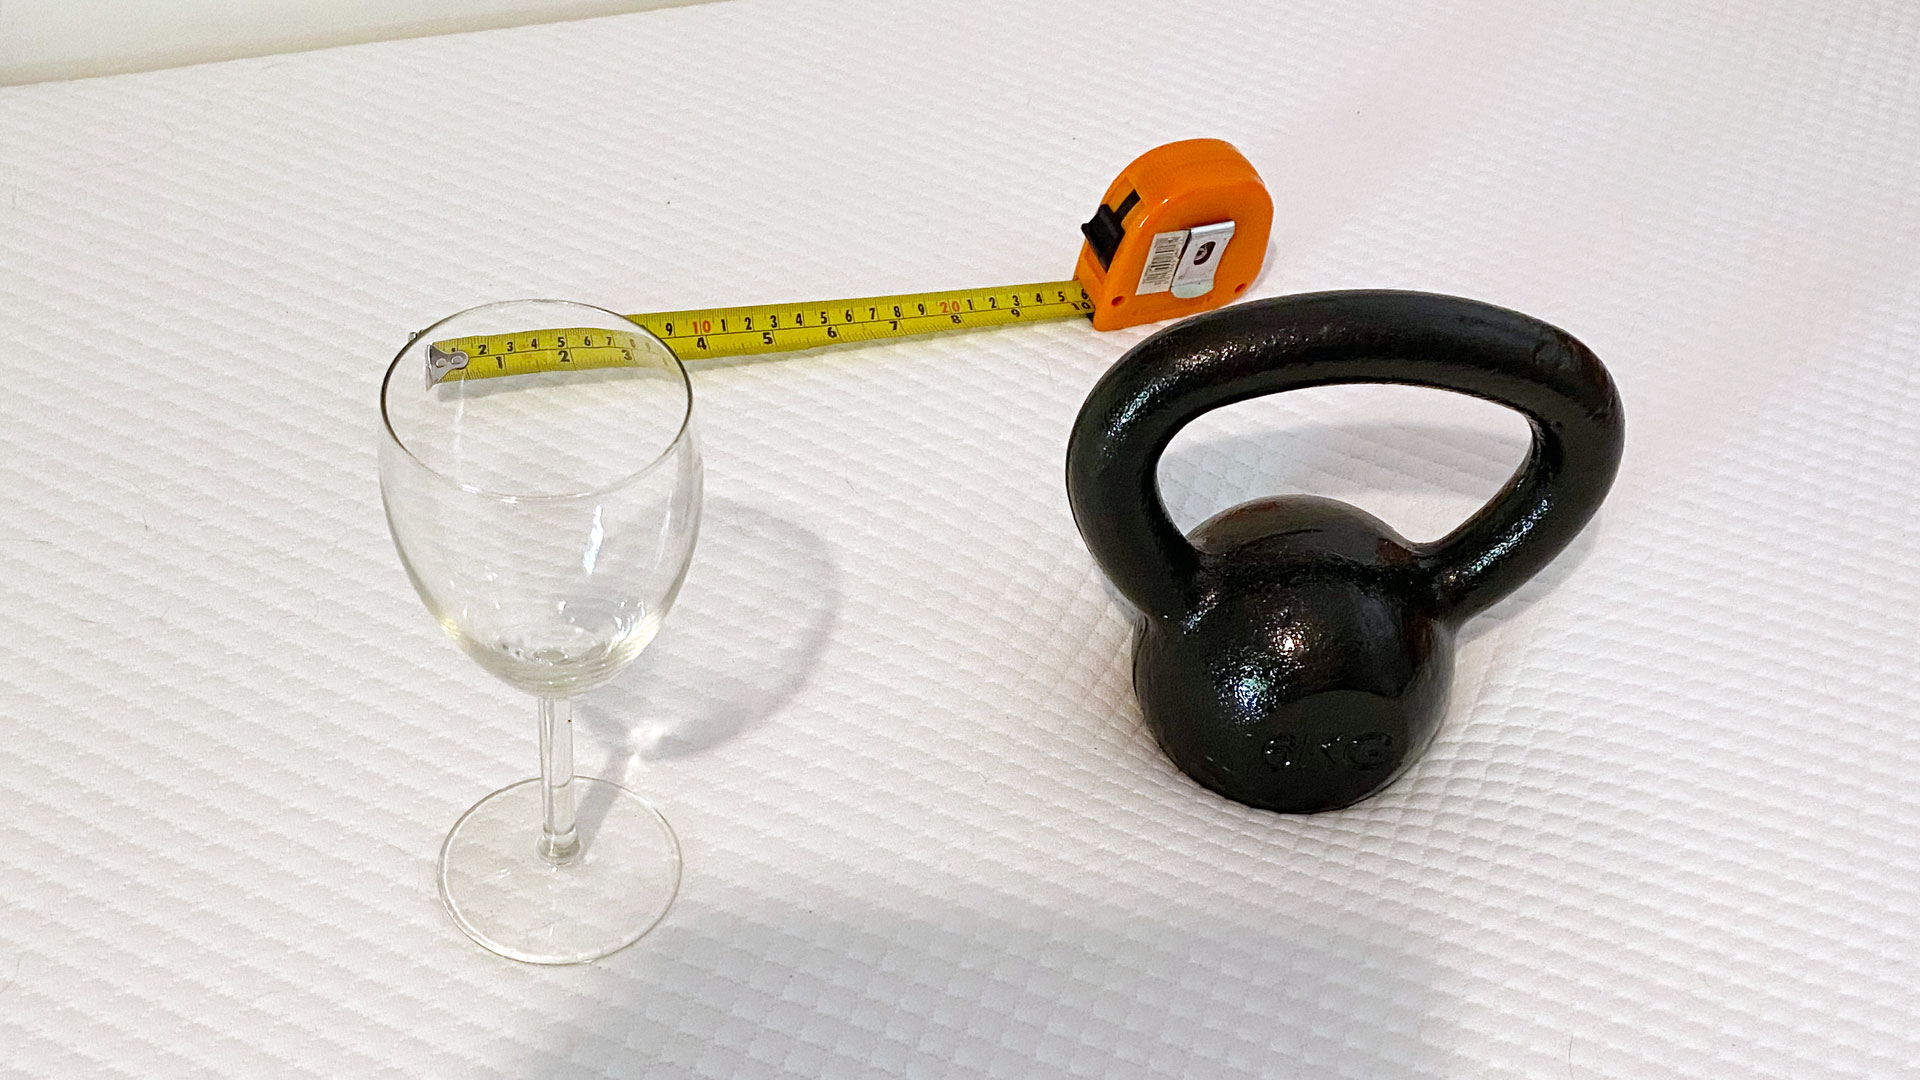 A weight, a wine glass and a tape measure on a Simbatex Foam Mattress